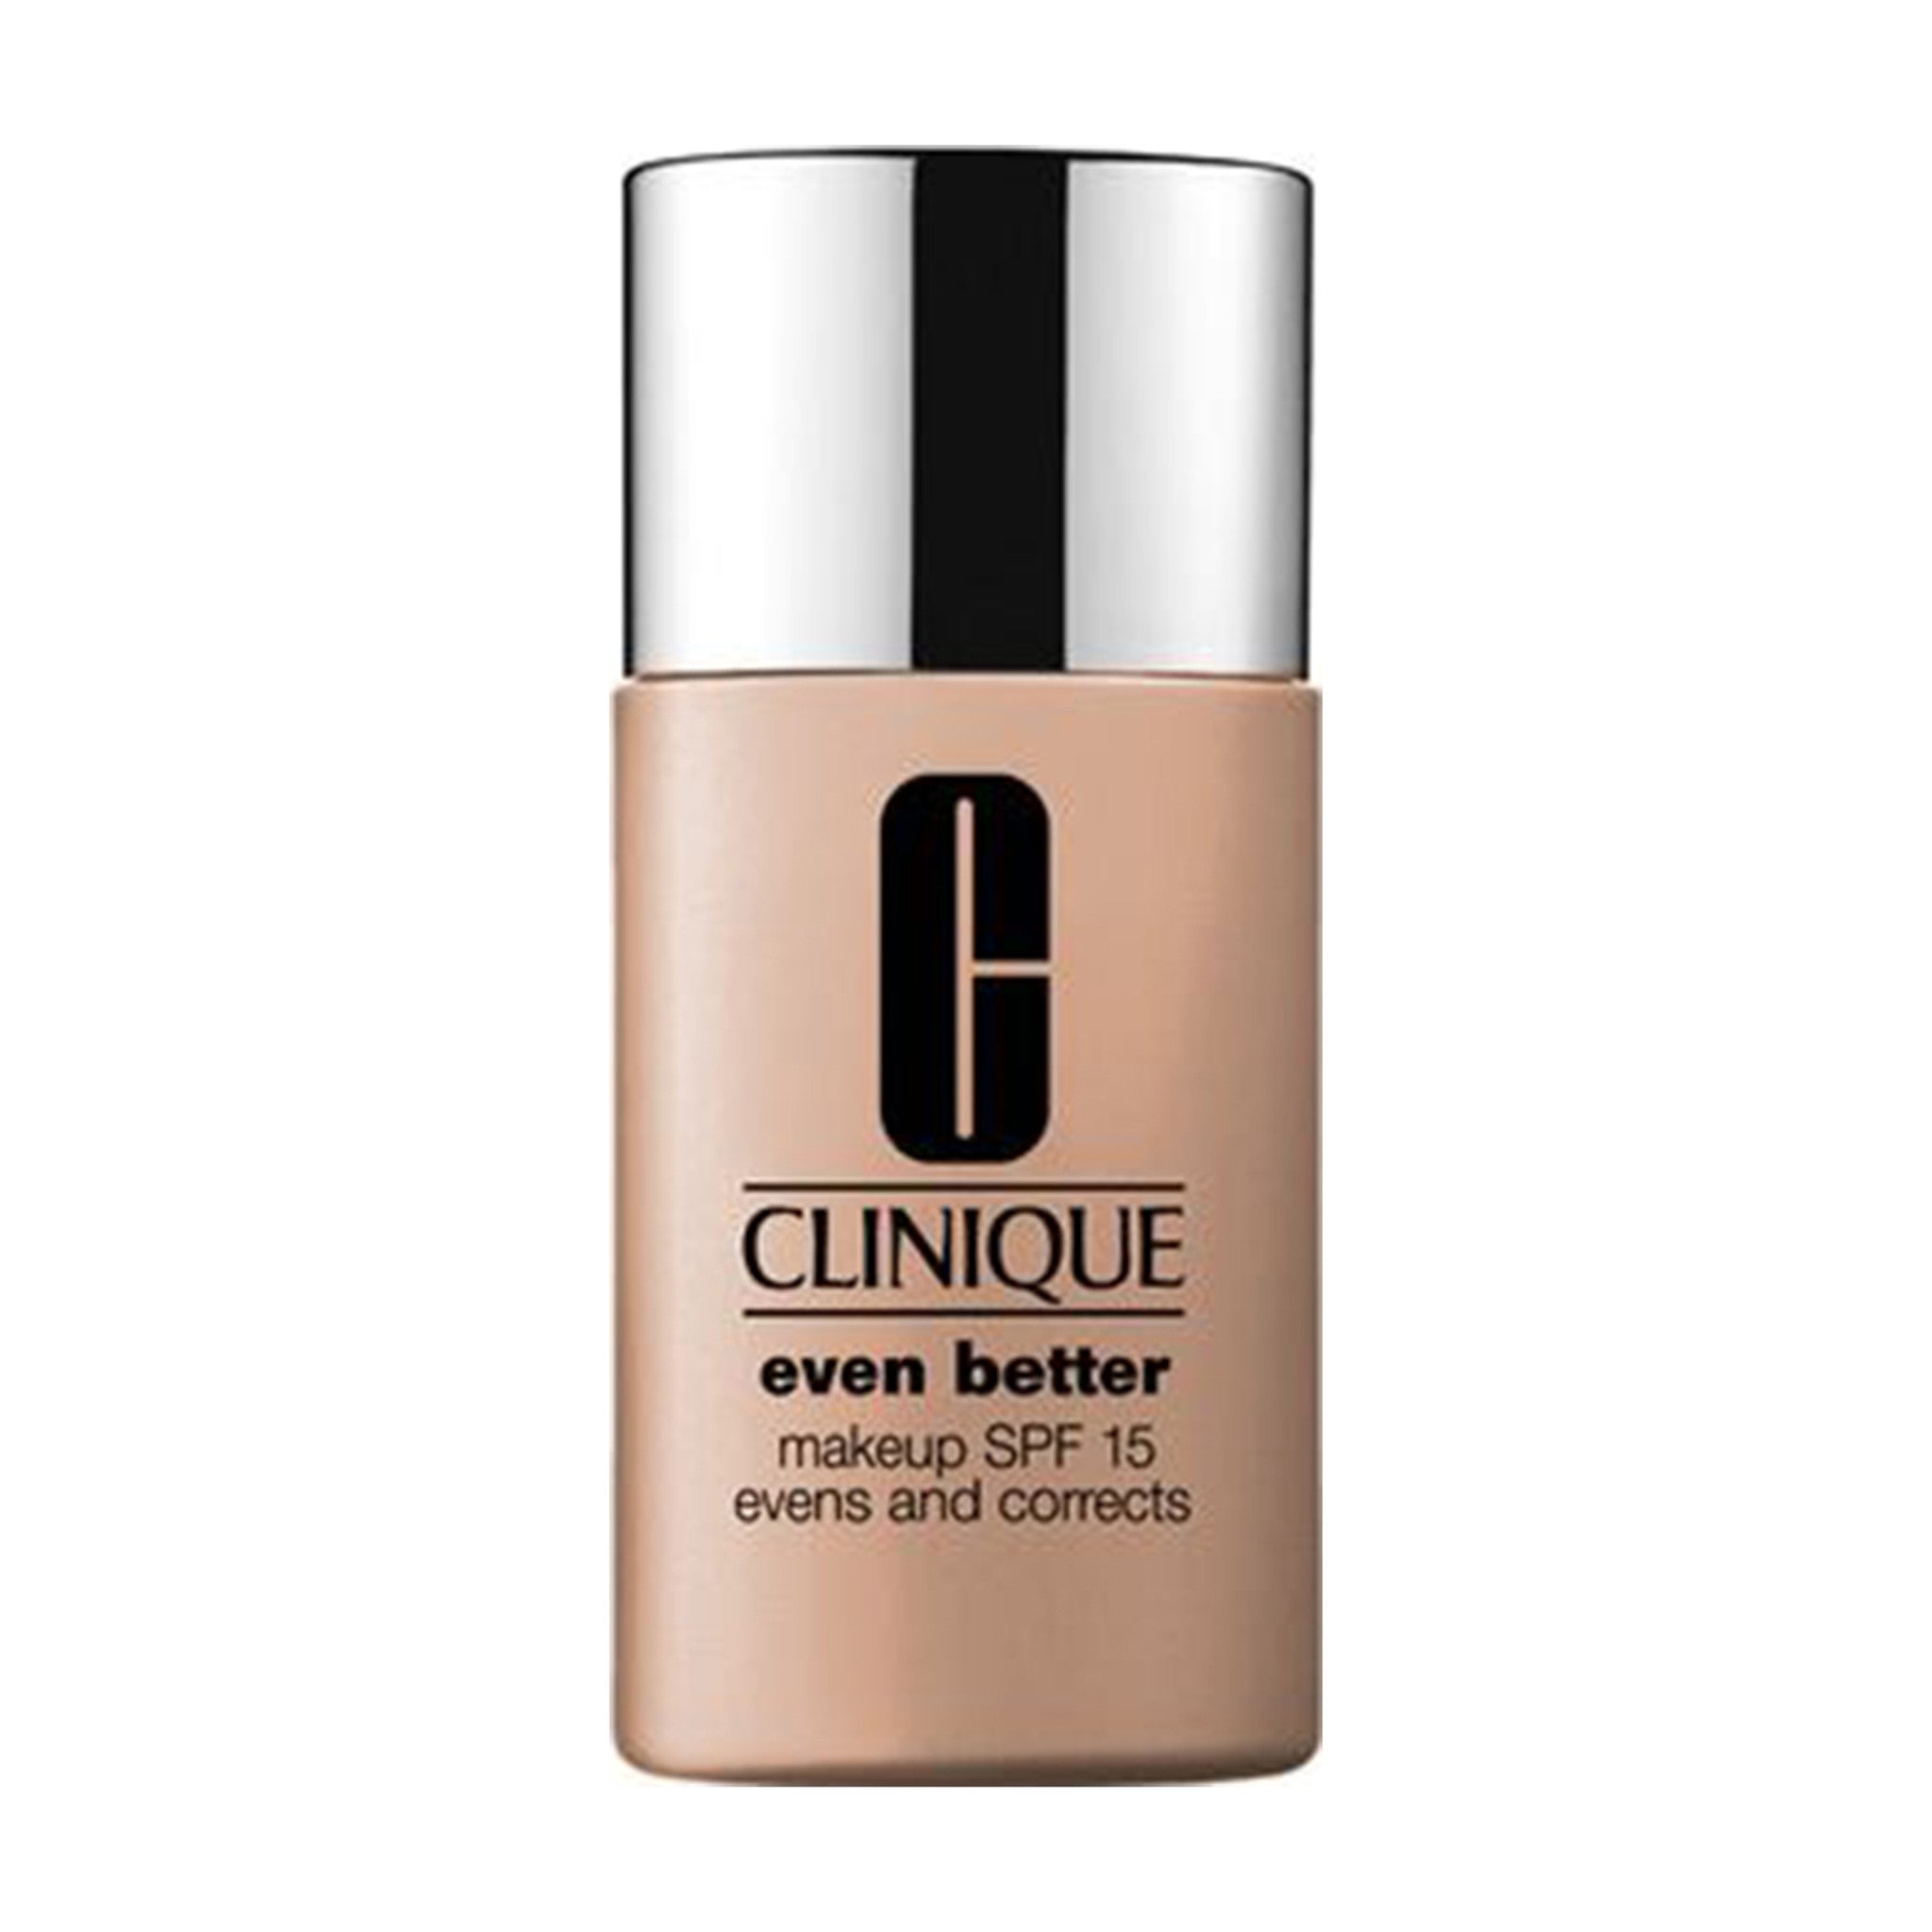 Clinique Even Better Makeup Broad Spectrum SPF 15 Color/Shade variant: PORCELAIN BEIGE main image. This product is for light complexions